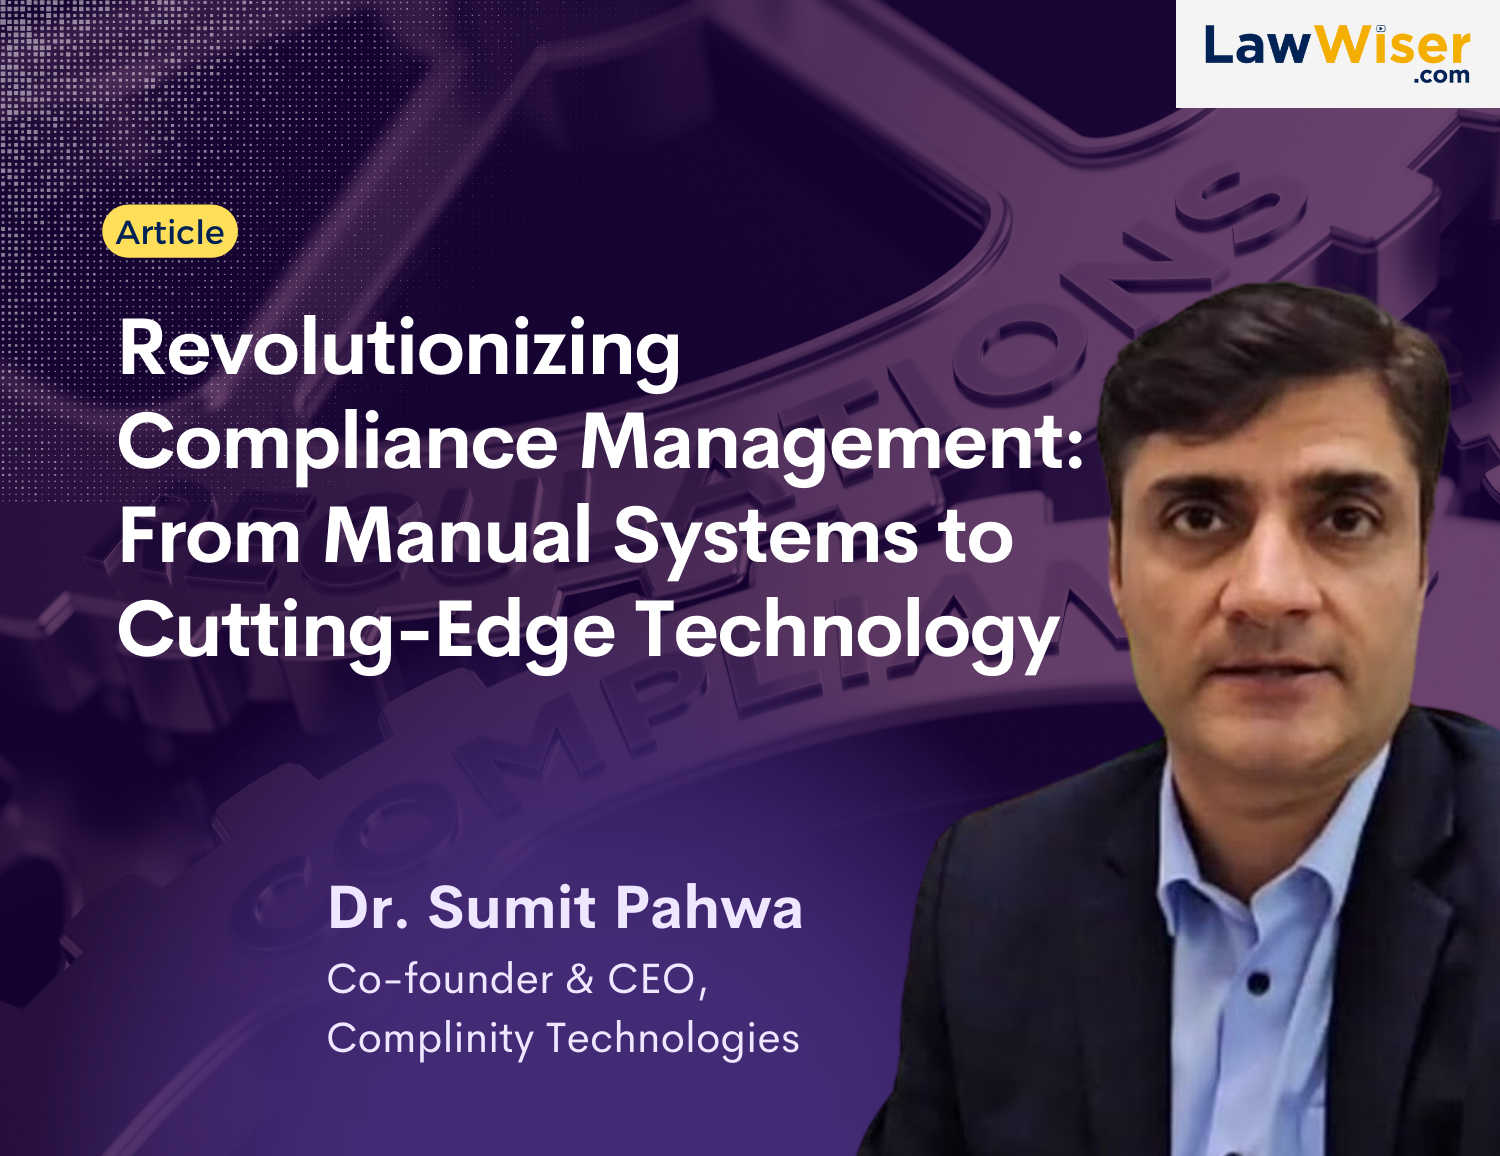 Revolutionizing Compliance Management: From Manual Systems to Cutting-Edge Technology